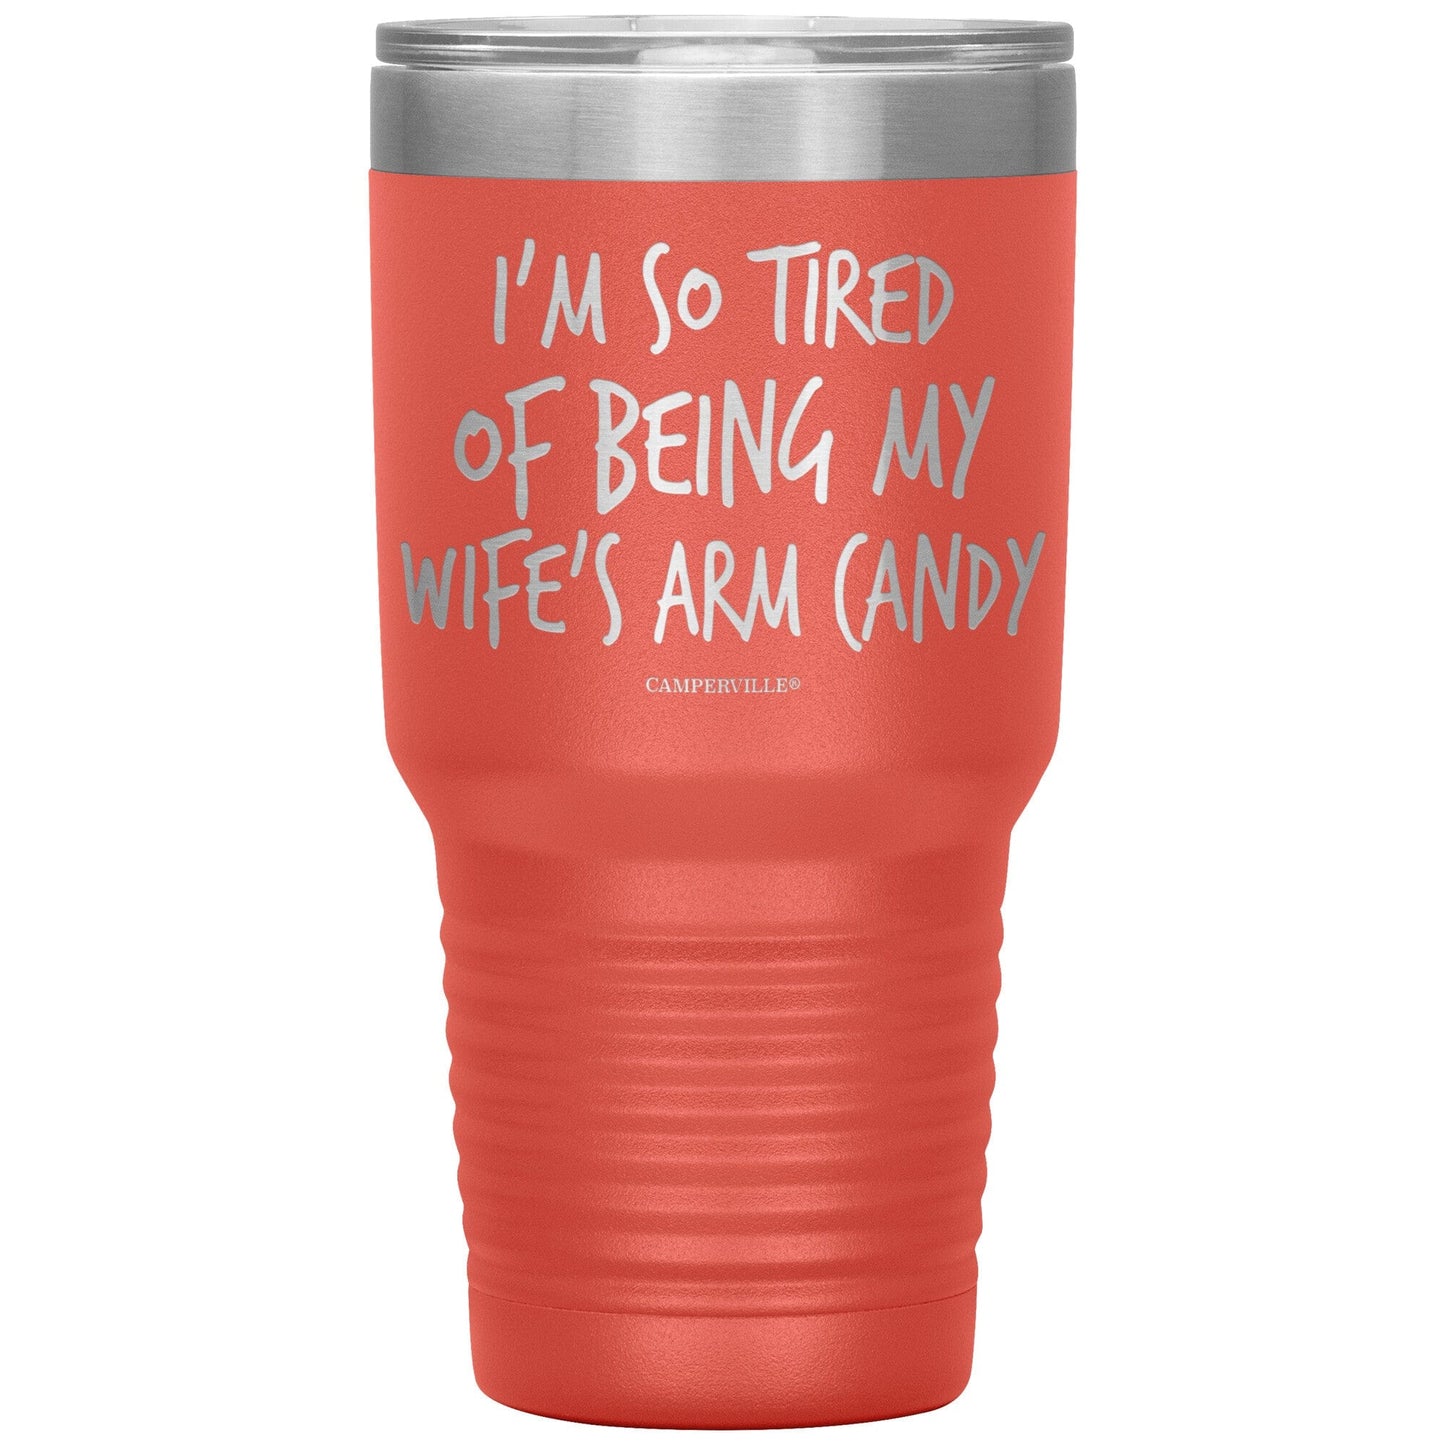 "I'm So Tired Of Being My Wife's Arm Candy" - Stainless Steel Tumbler